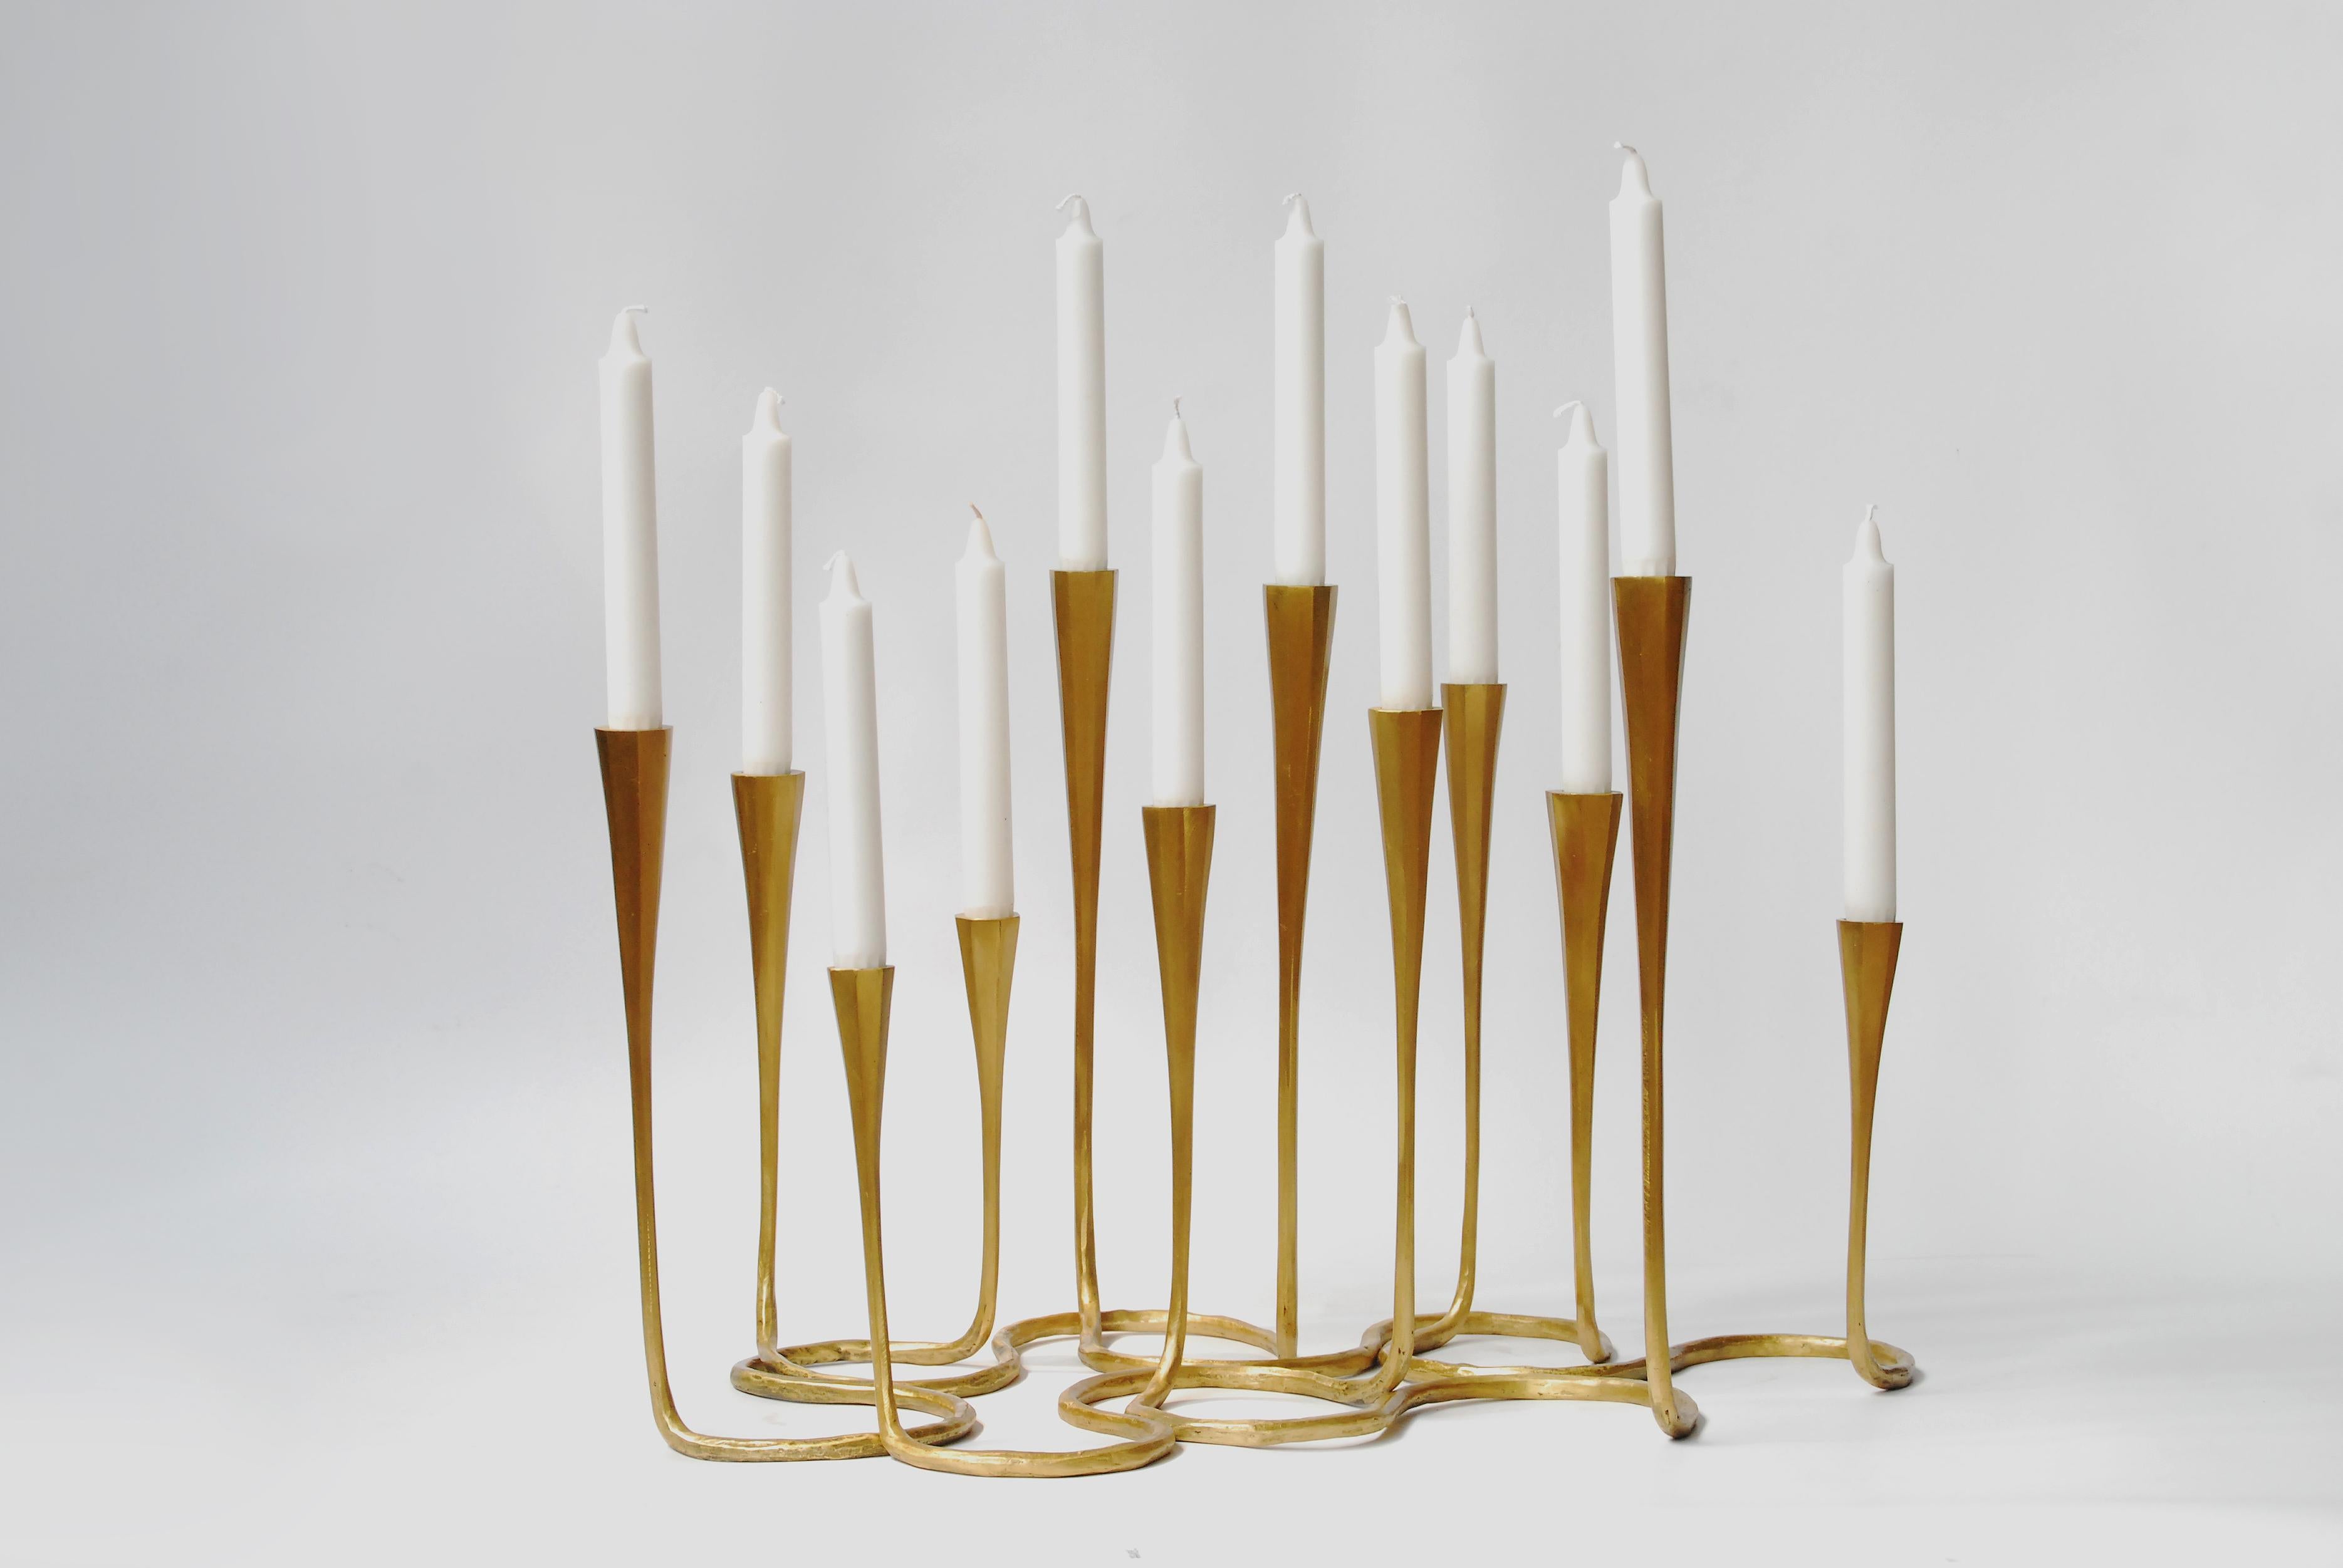 Gold bronze daisy candlestands are cast using the lost wax method. Each daisy comes as a set of two candlestands joined at the base. Combine several to create a stunning candlelit display on tabletops. Available in custom finishes.